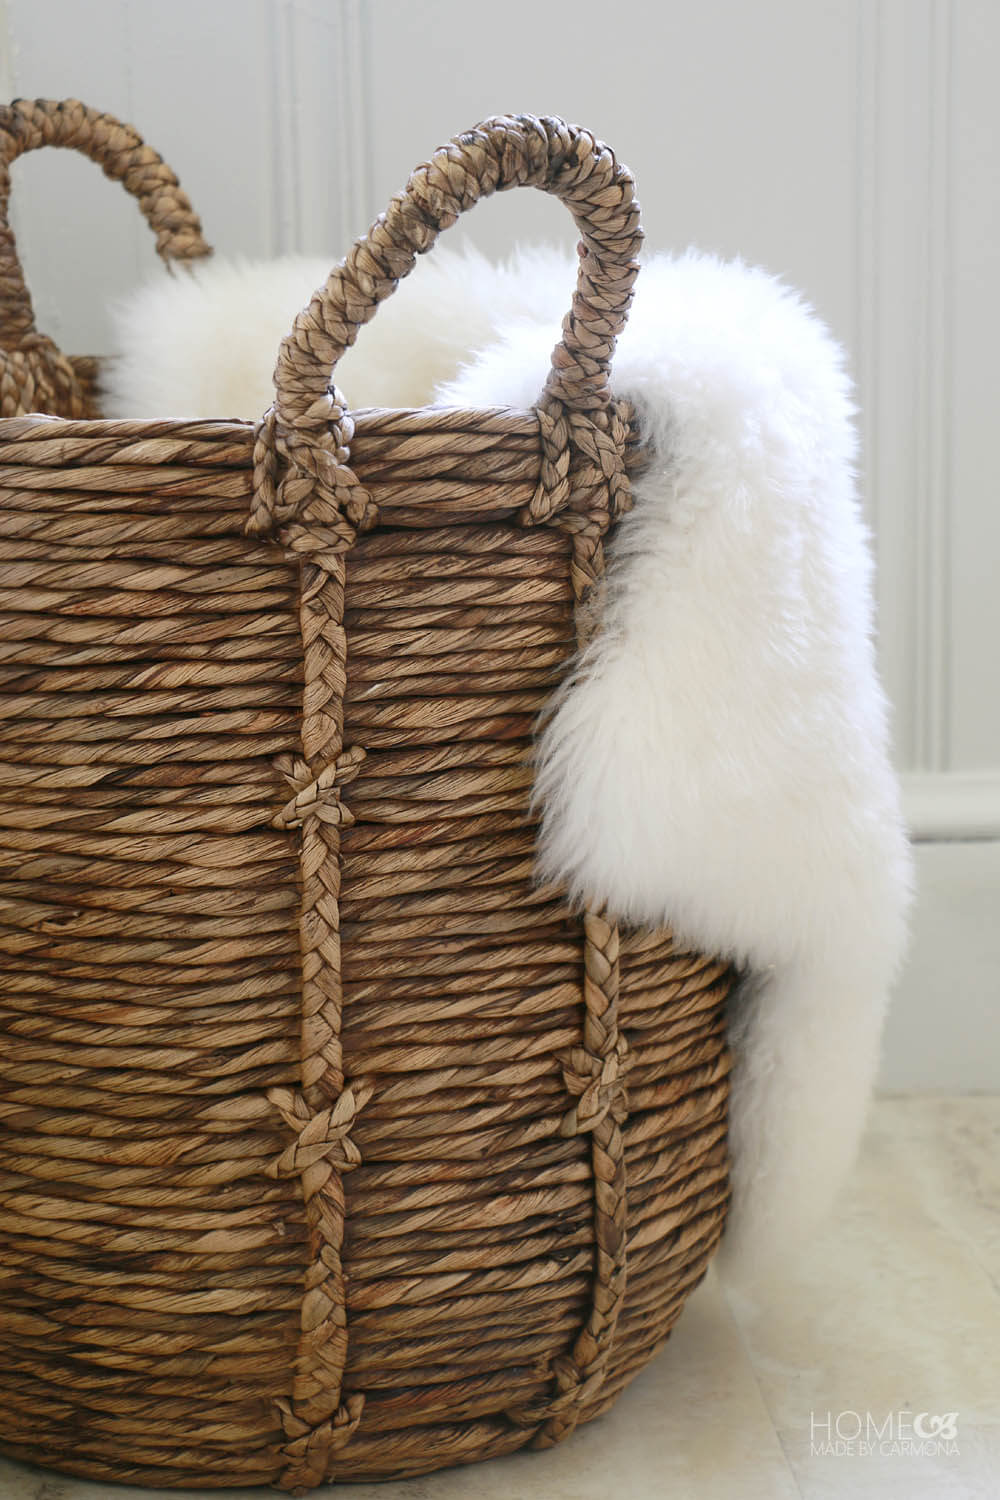 Basket with furs